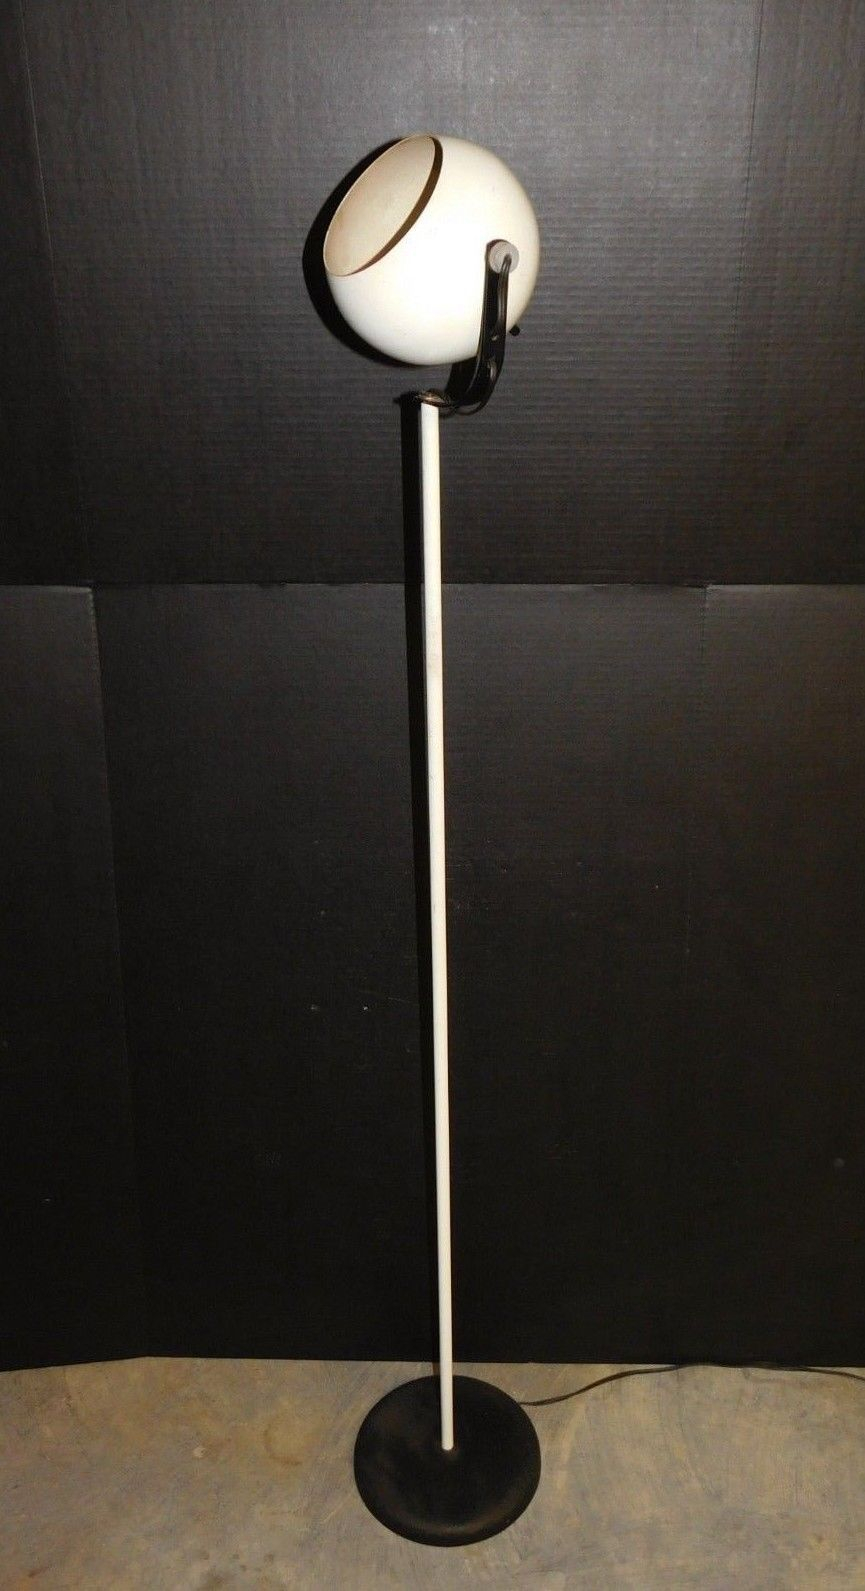 Details About George Kovacs Floor Lamp Robert Sonneman Mcm intended for dimensions 865 X 1591